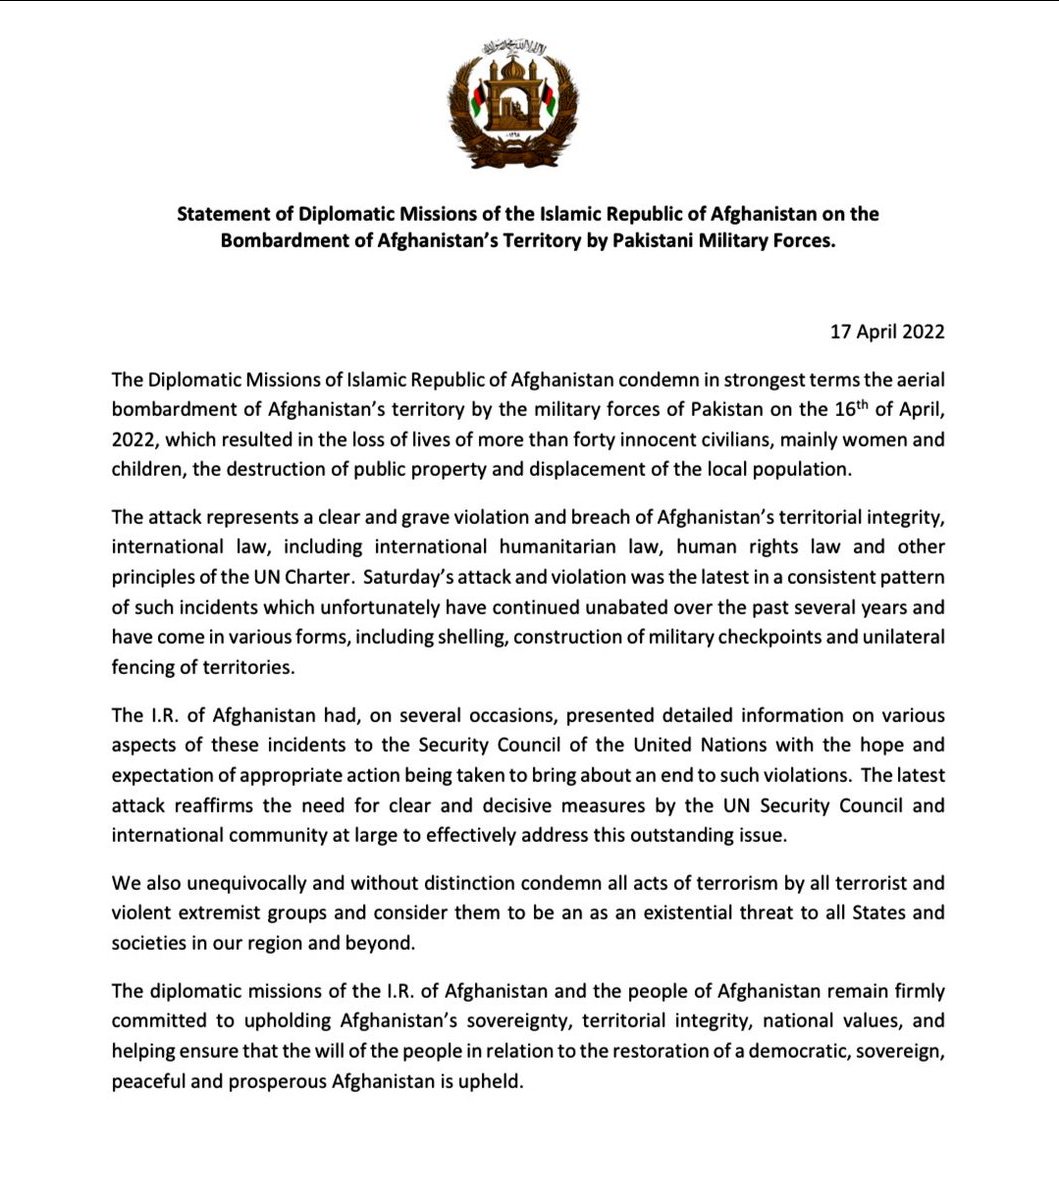 Statement of Diplomatic Missions of the Islamic Republic   of #Afghanistan on the Bombardment of Afghanistan's territory by #Pakistani Military Forces.

#PakistaniArmyWarCrimes #Pakistan #PakistanNeedsProgress